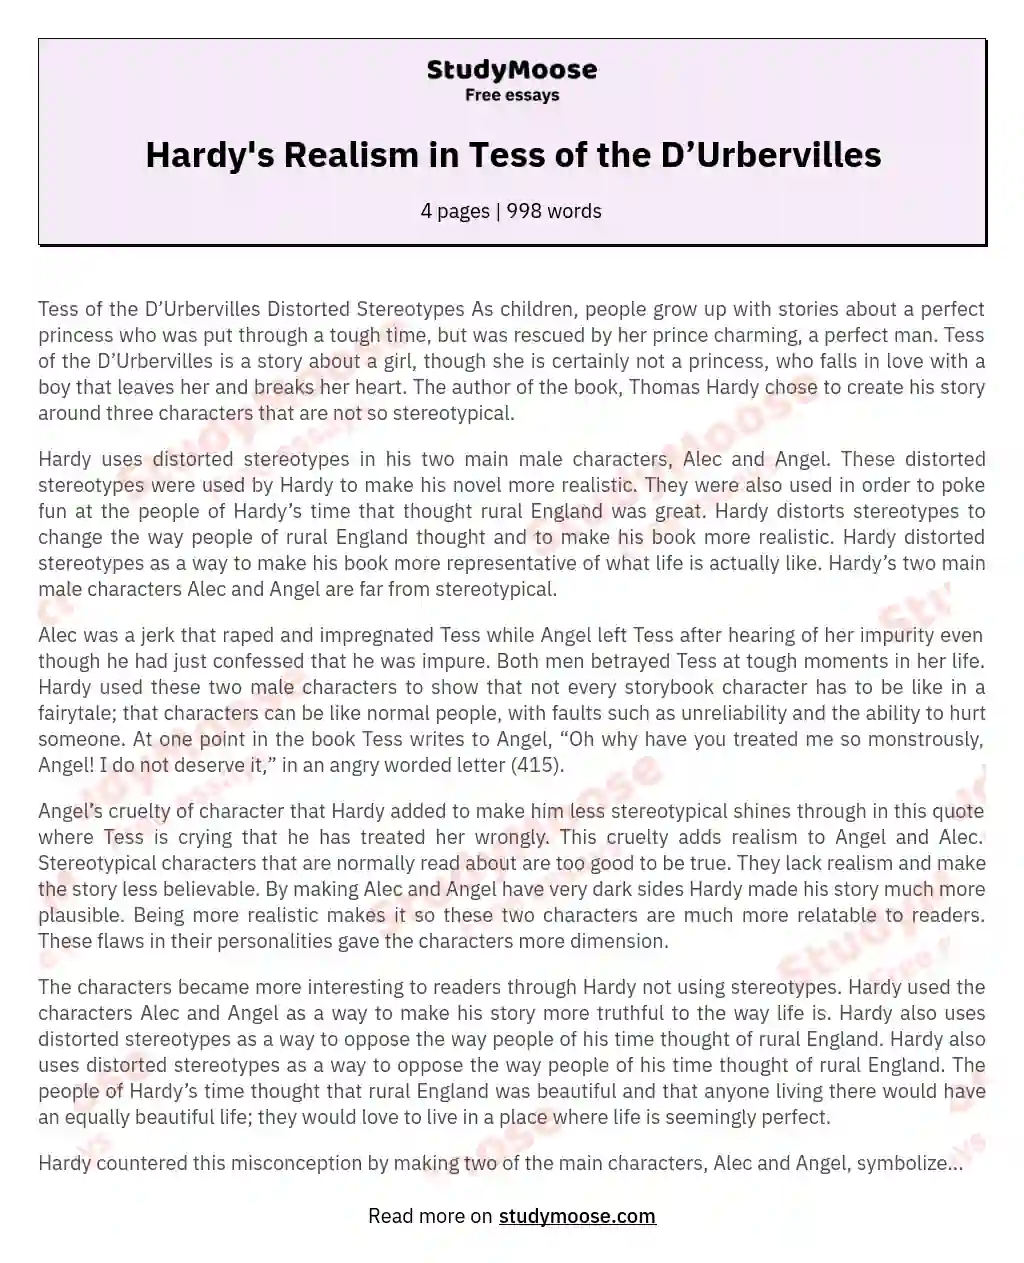 Hardy's Realism in Tess of the D’Urbervilles essay